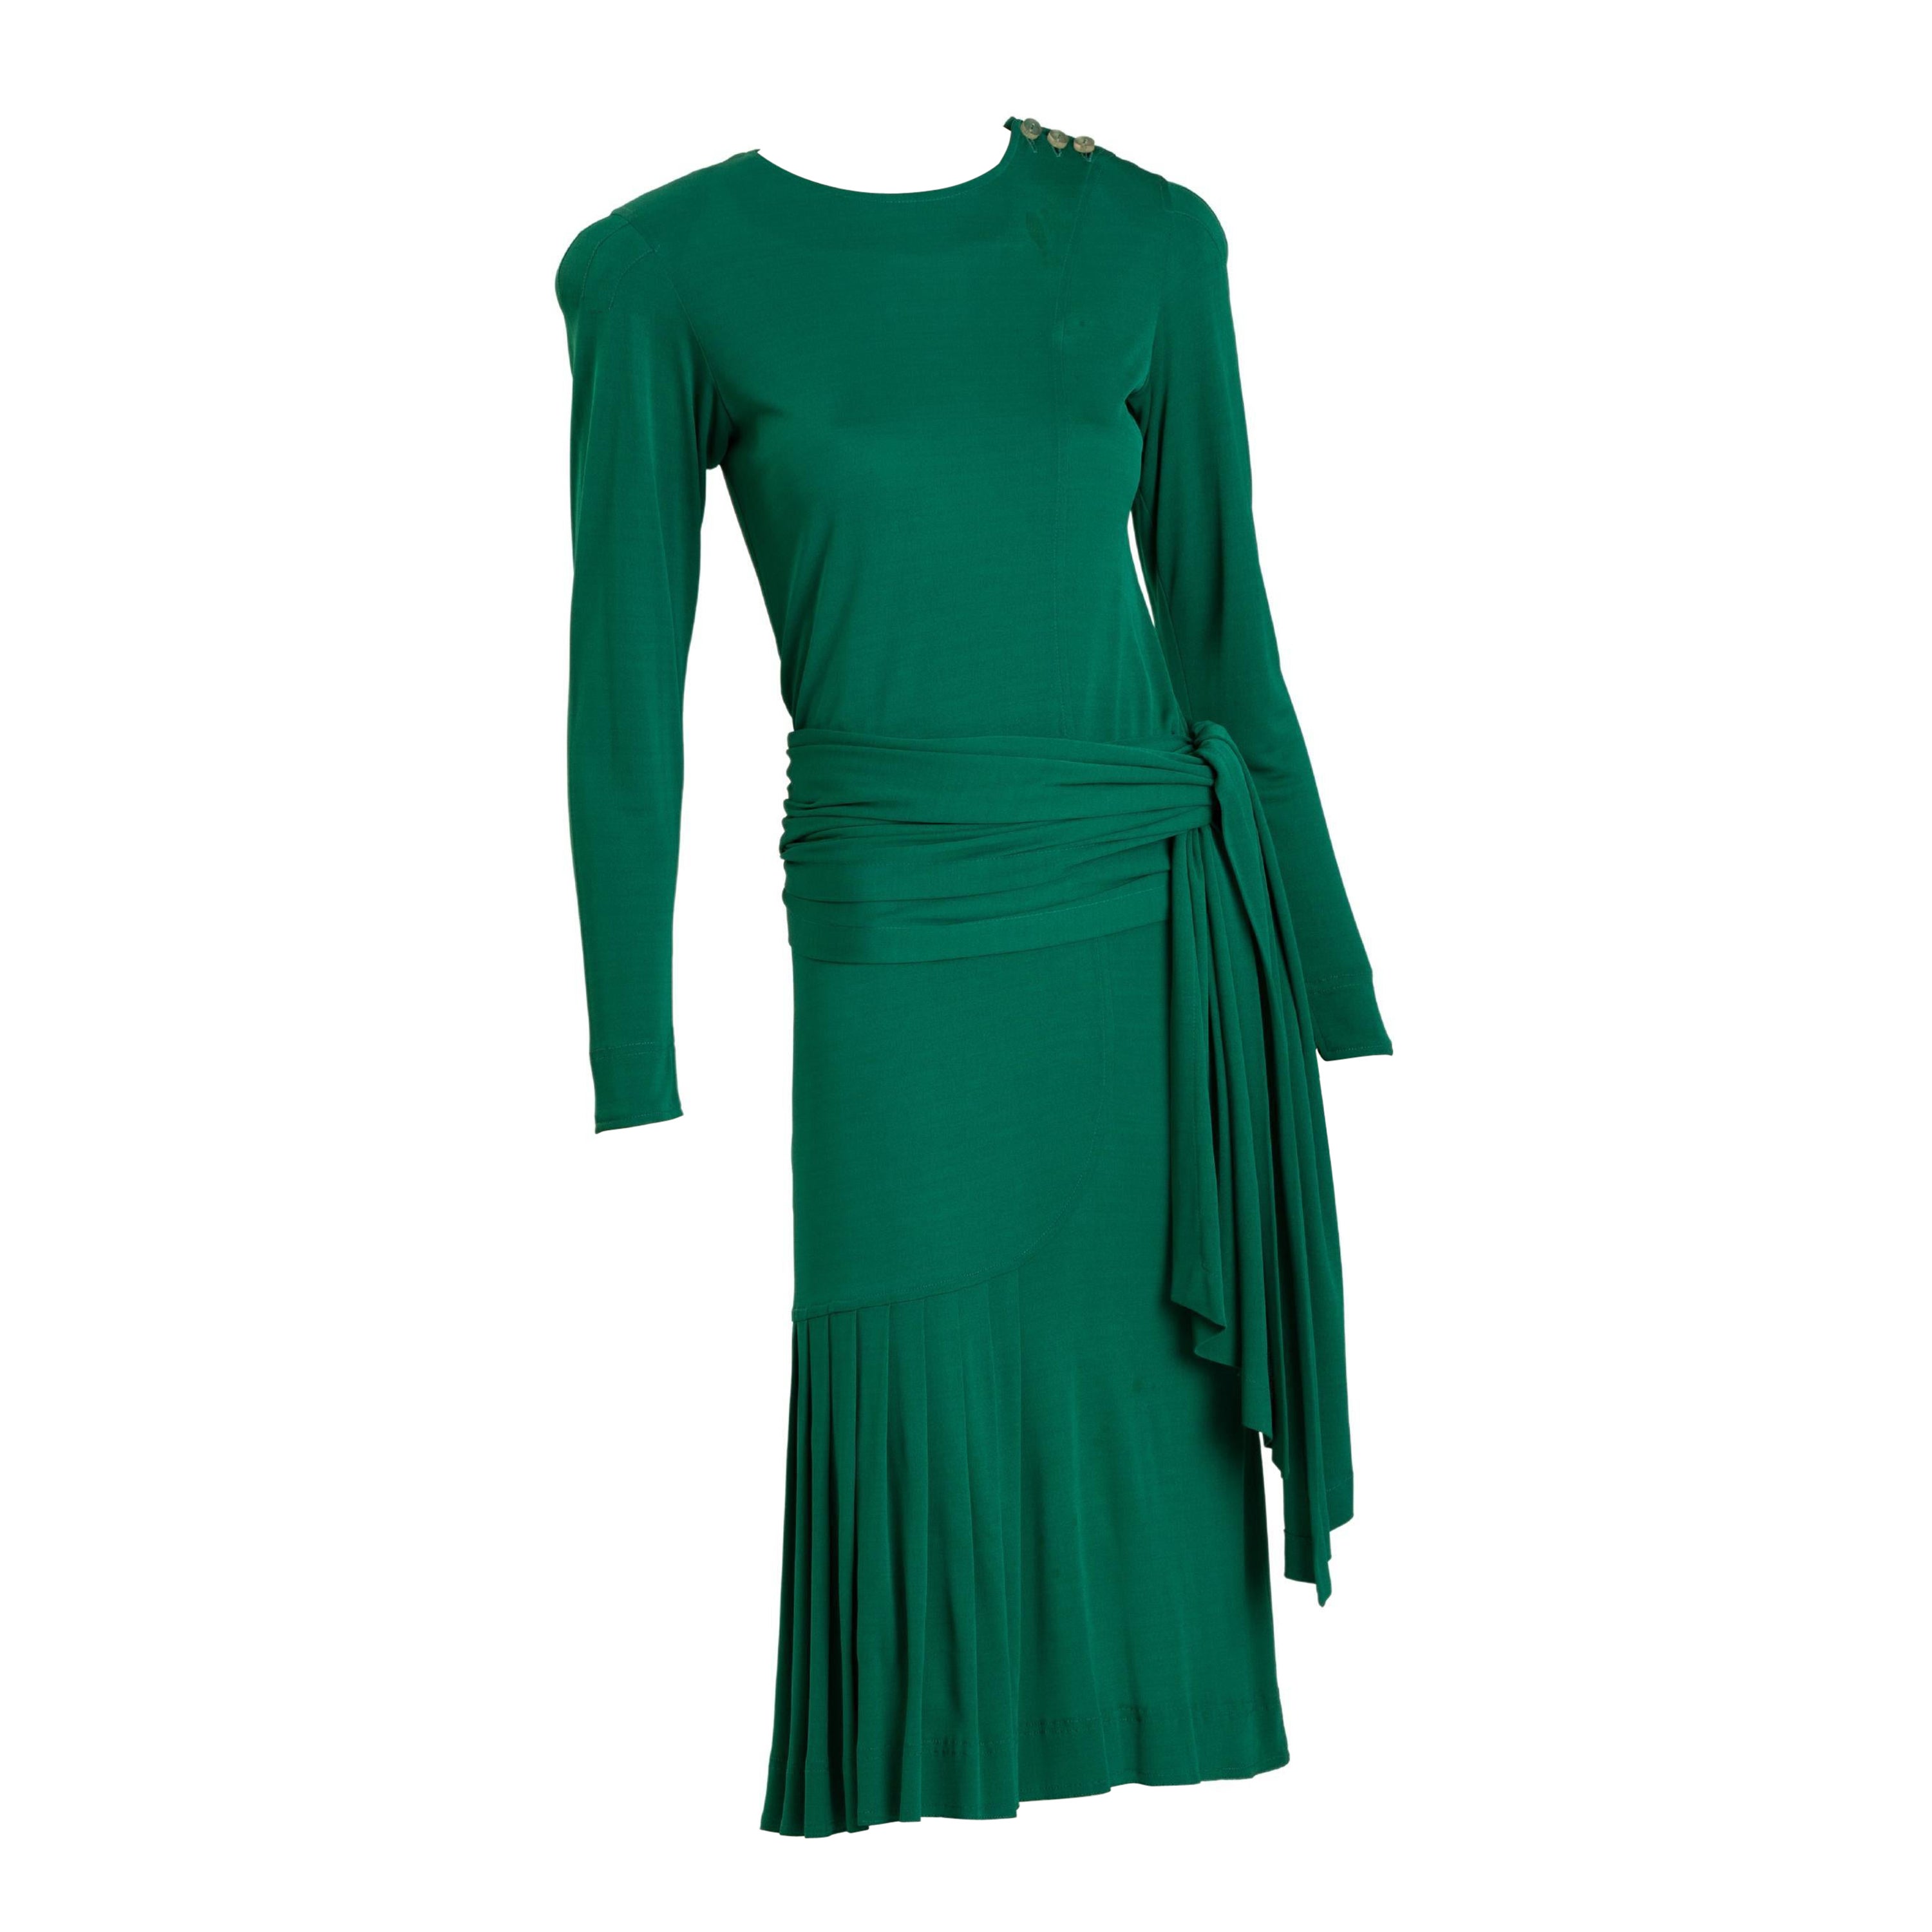 Jean Muir emerald green jersey cocktail dress with long wrap sash. Sash may also be worn as long scarf around neck, and tied at lower back. Front of dress has asymmetrical pleating. Three clear button closure at left collarbone, one on each cuff.